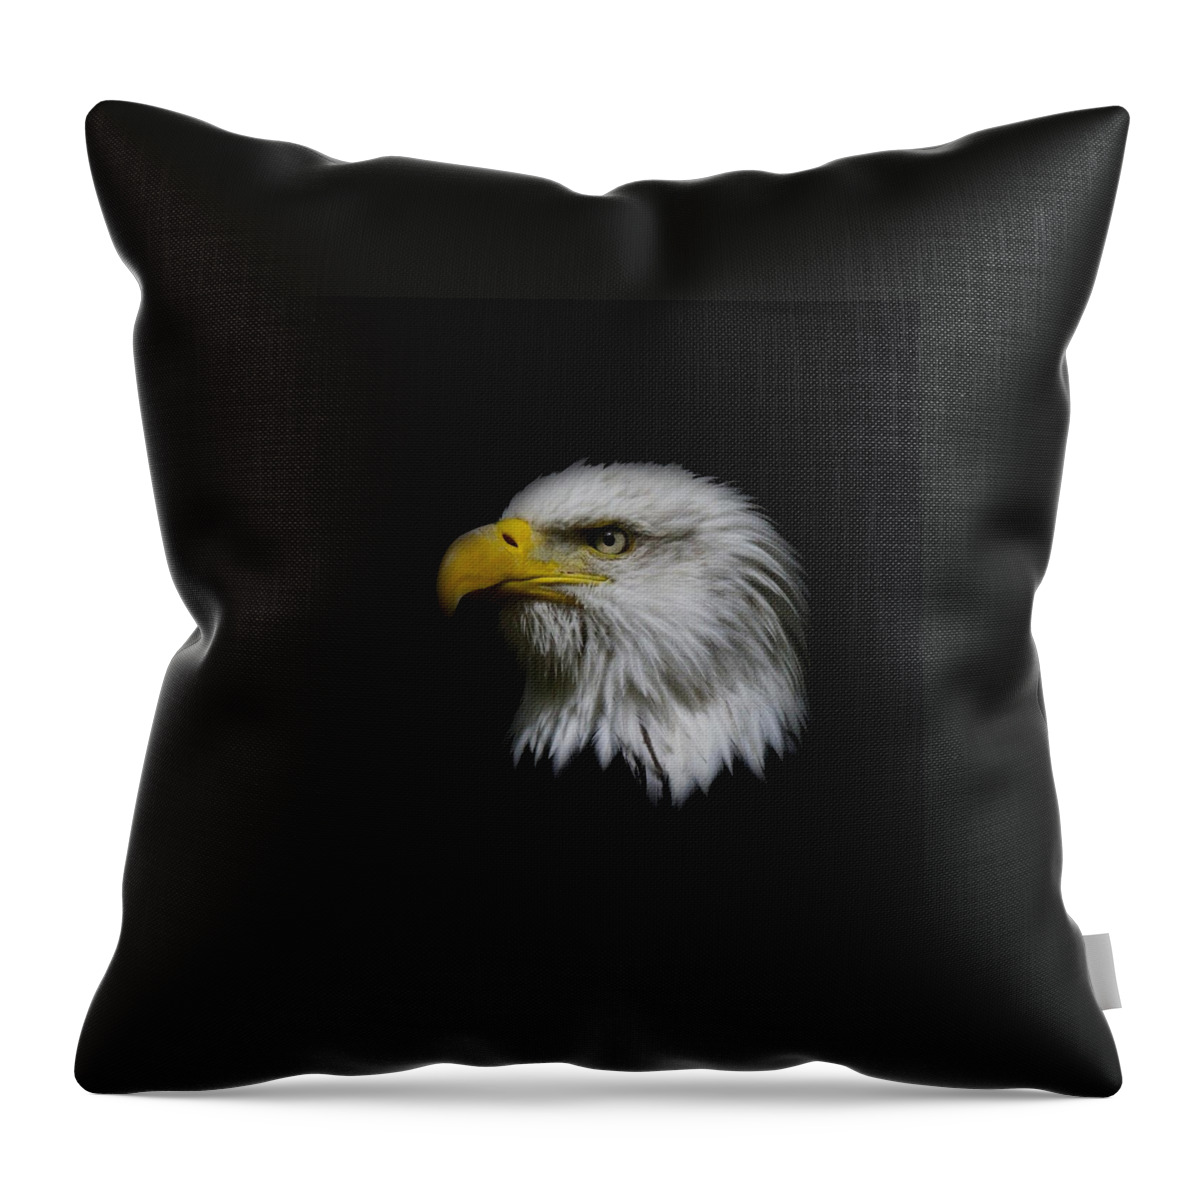 Bald Eagle Throw Pillow featuring the photograph Eagle Head by Steve McKinzie